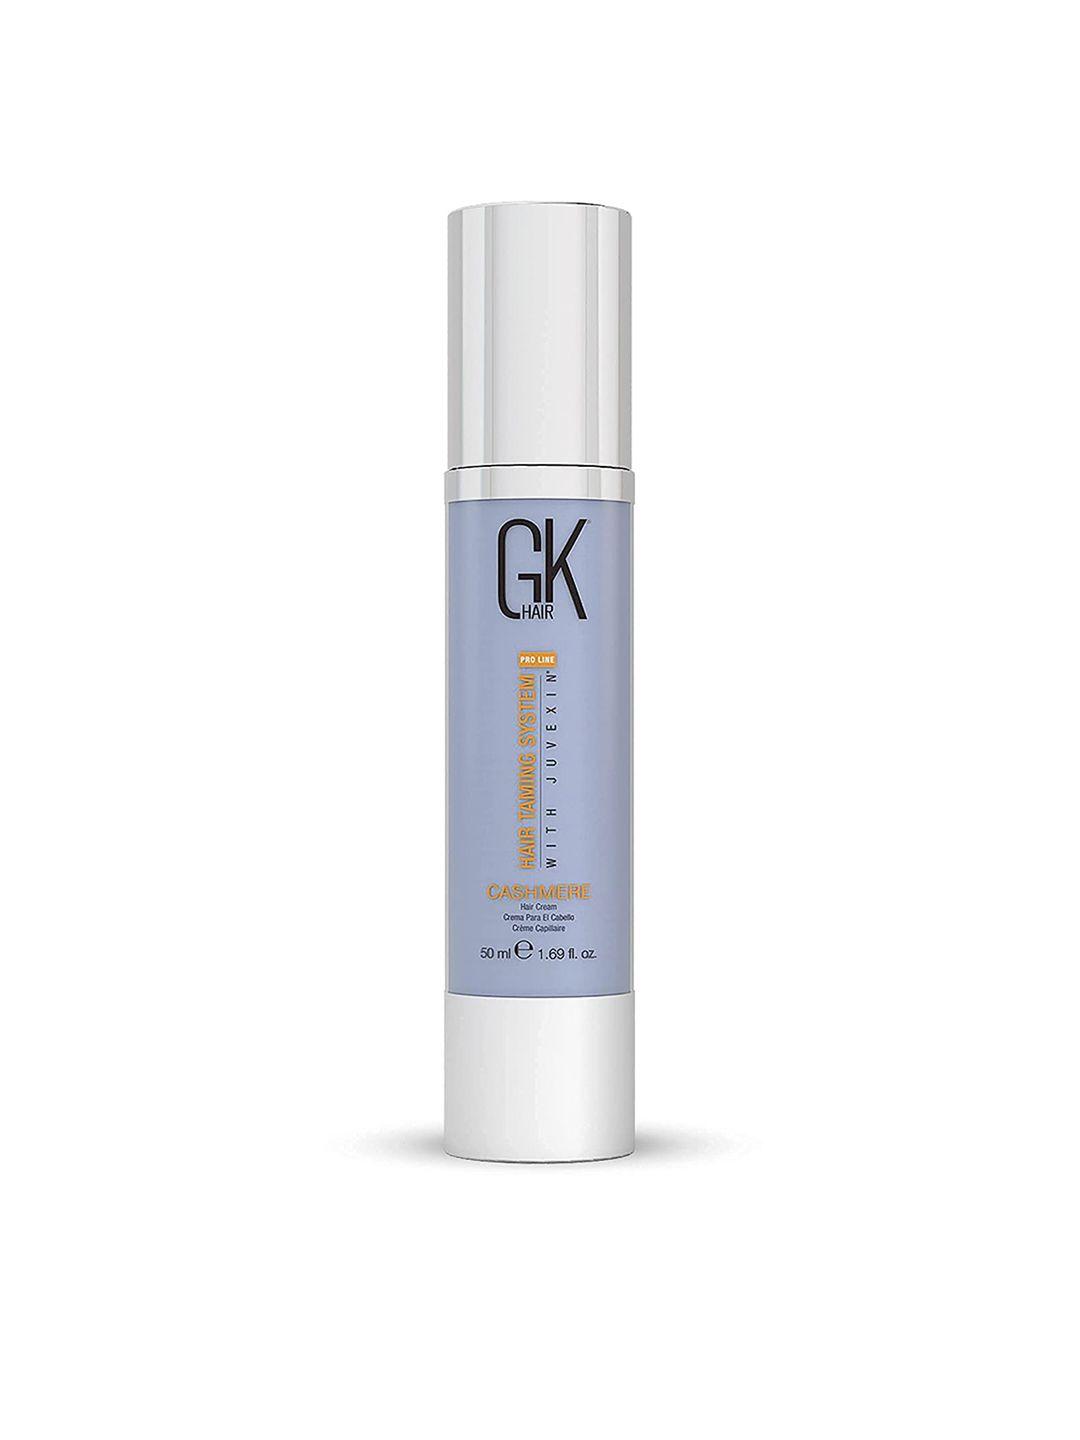 gk hair pro line hair taming system with juvexin global keratin cashmere hair cream - 50ml